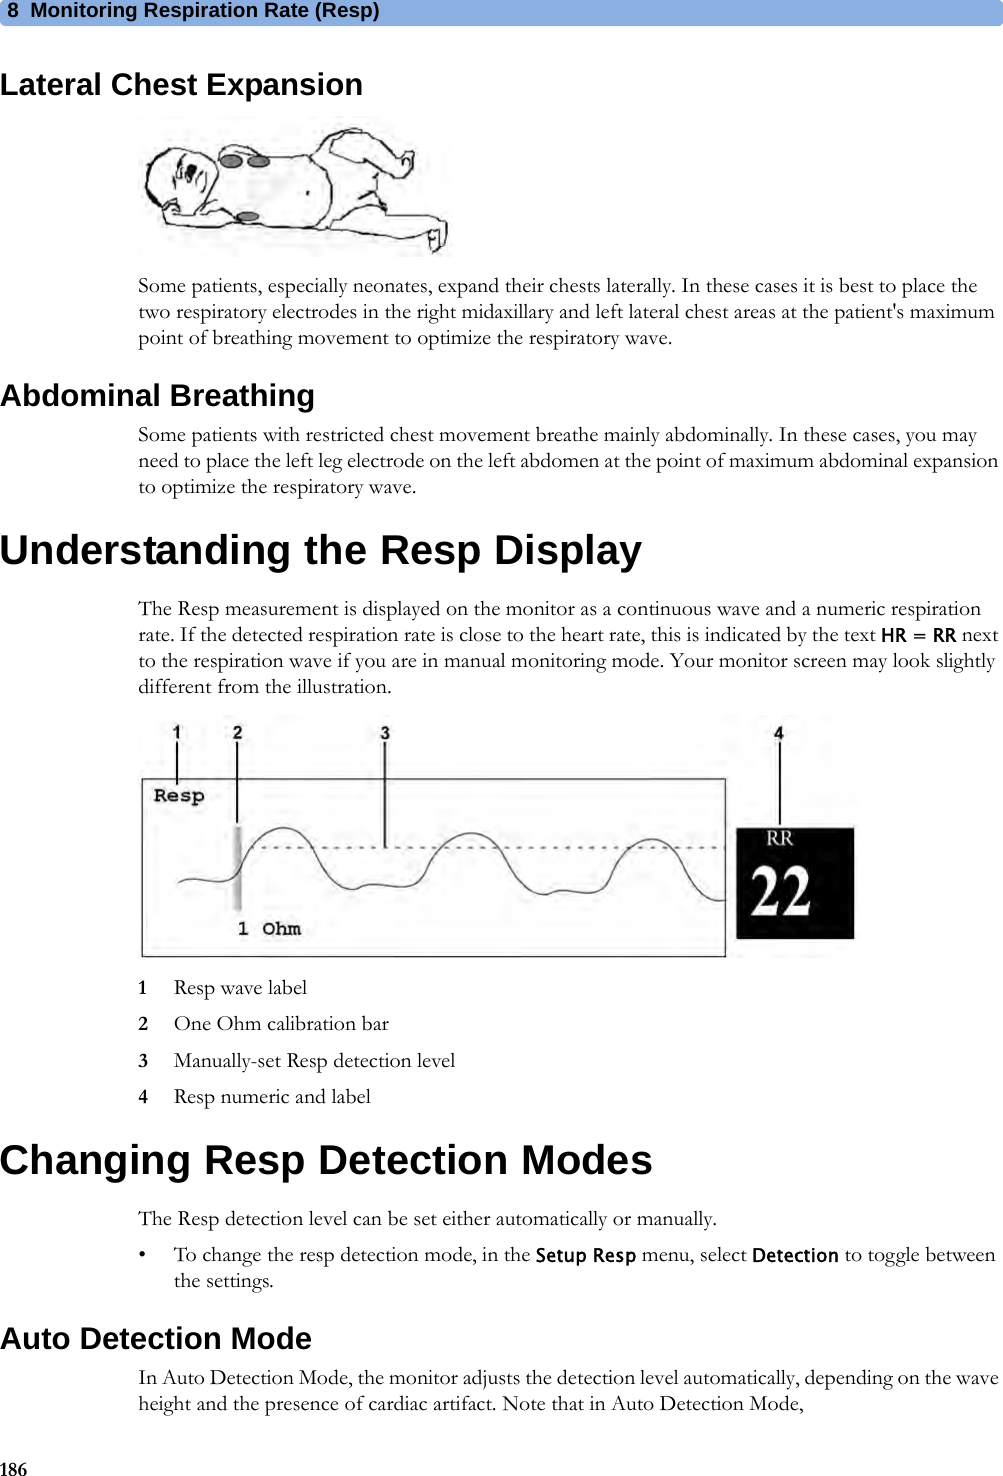 8 Monitoring Respiration Rate (Resp)186Lateral Chest ExpansionSome patients, especially neonates, expand their chests laterally. In these cases it is best to place the two respiratory electrodes in the right midaxillary and left lateral chest areas at the patient&apos;s maximum point of breathing movement to optimize the respiratory wave.Abdominal BreathingSome patients with restricted chest movement breathe mainly abdominally. In these cases, you may need to place the left leg electrode on the left abdomen at the point of maximum abdominal expansion to optimize the respiratory wave.Understanding the Resp DisplayThe Resp measurement is displayed on the monitor as a continuous wave and a numeric respiration rate. If the detected respiration rate is close to the heart rate, this is indicated by the text HR = RR next to the respiration wave if you are in manual monitoring mode. Your monitor screen may look slightly different from the illustration.1Resp wave label2One Ohm calibration bar3Manually-set Resp detection level4Resp numeric and labelChanging Resp Detection ModesThe Resp detection level can be set either automatically or manually.• To change the resp detection mode, in the Setup Resp menu, select Detection to toggle between the settings.Auto Detection ModeIn Auto Detection Mode, the monitor adjusts the detection level automatically, depending on the wave height and the presence of cardiac artifact. Note that in Auto Detection Mode,